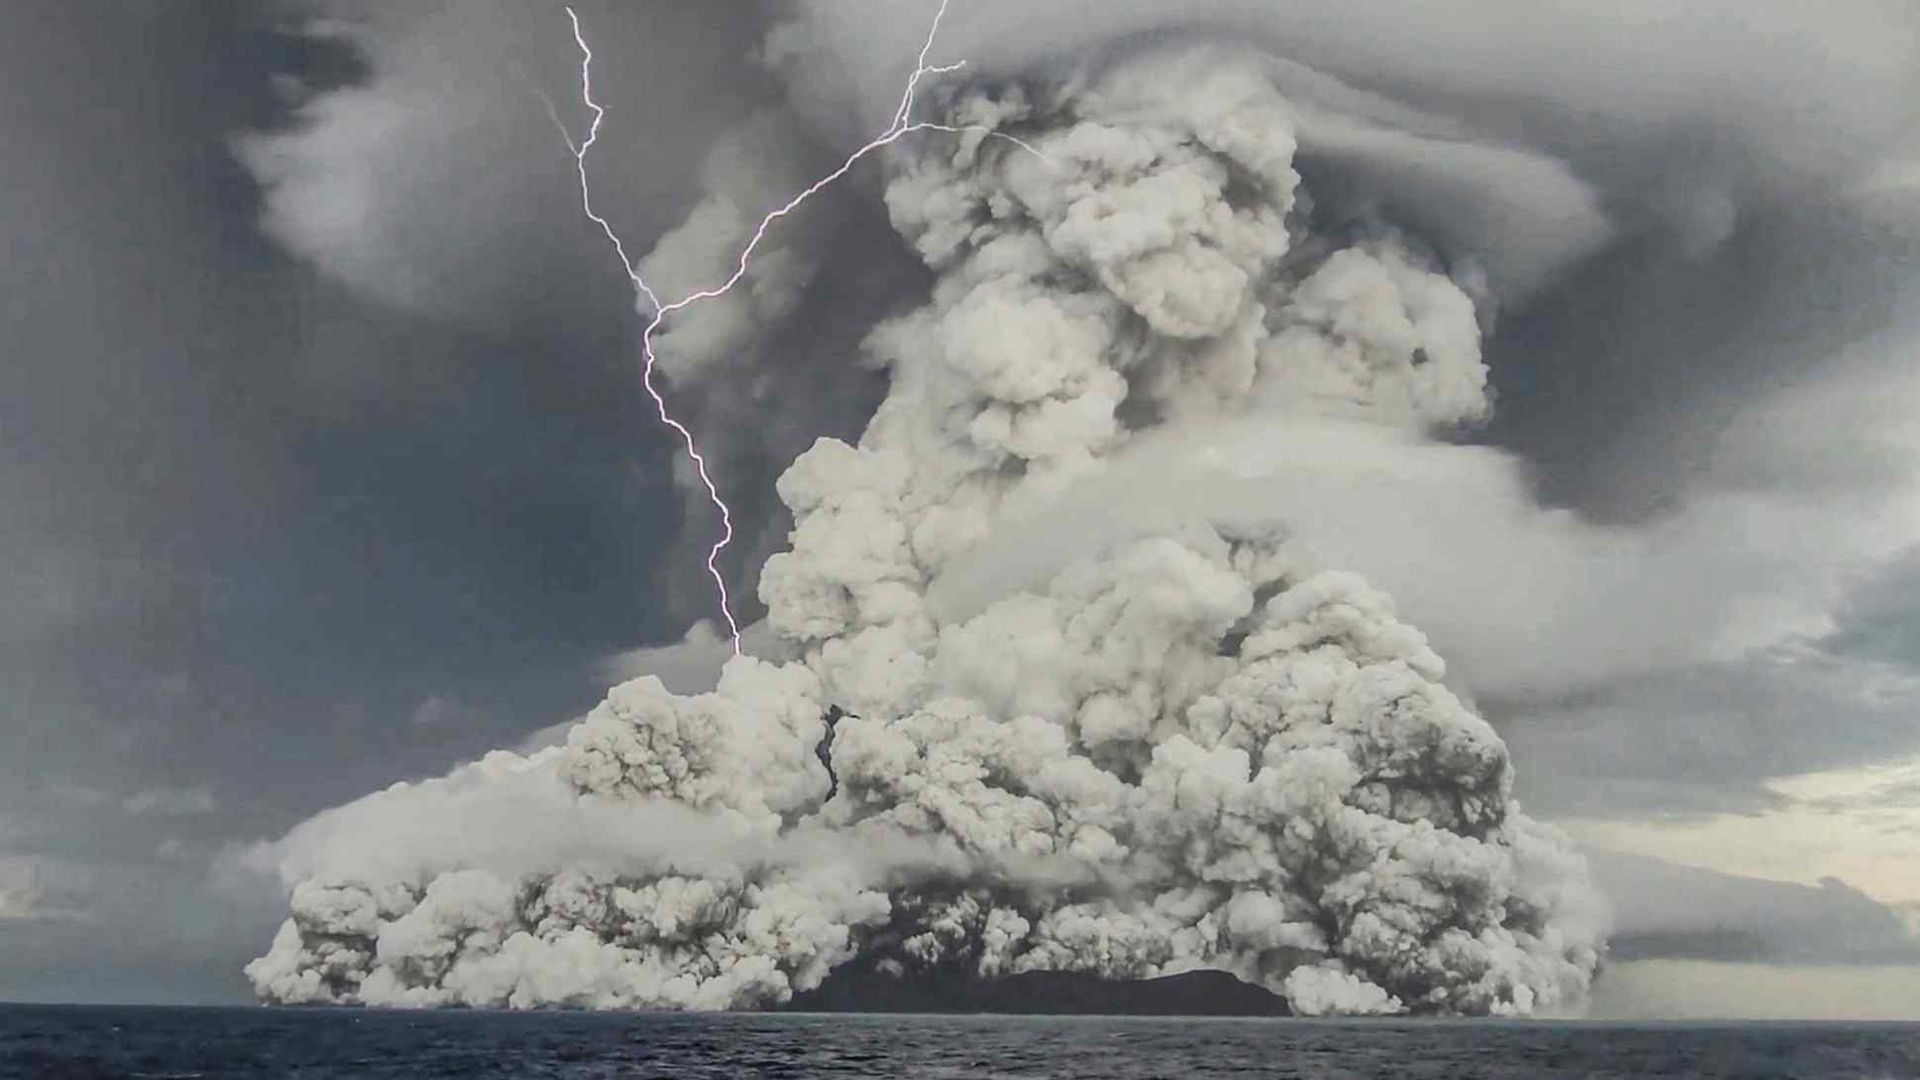 50 million tons of water vapor from Tonga's eruption could warm Earth